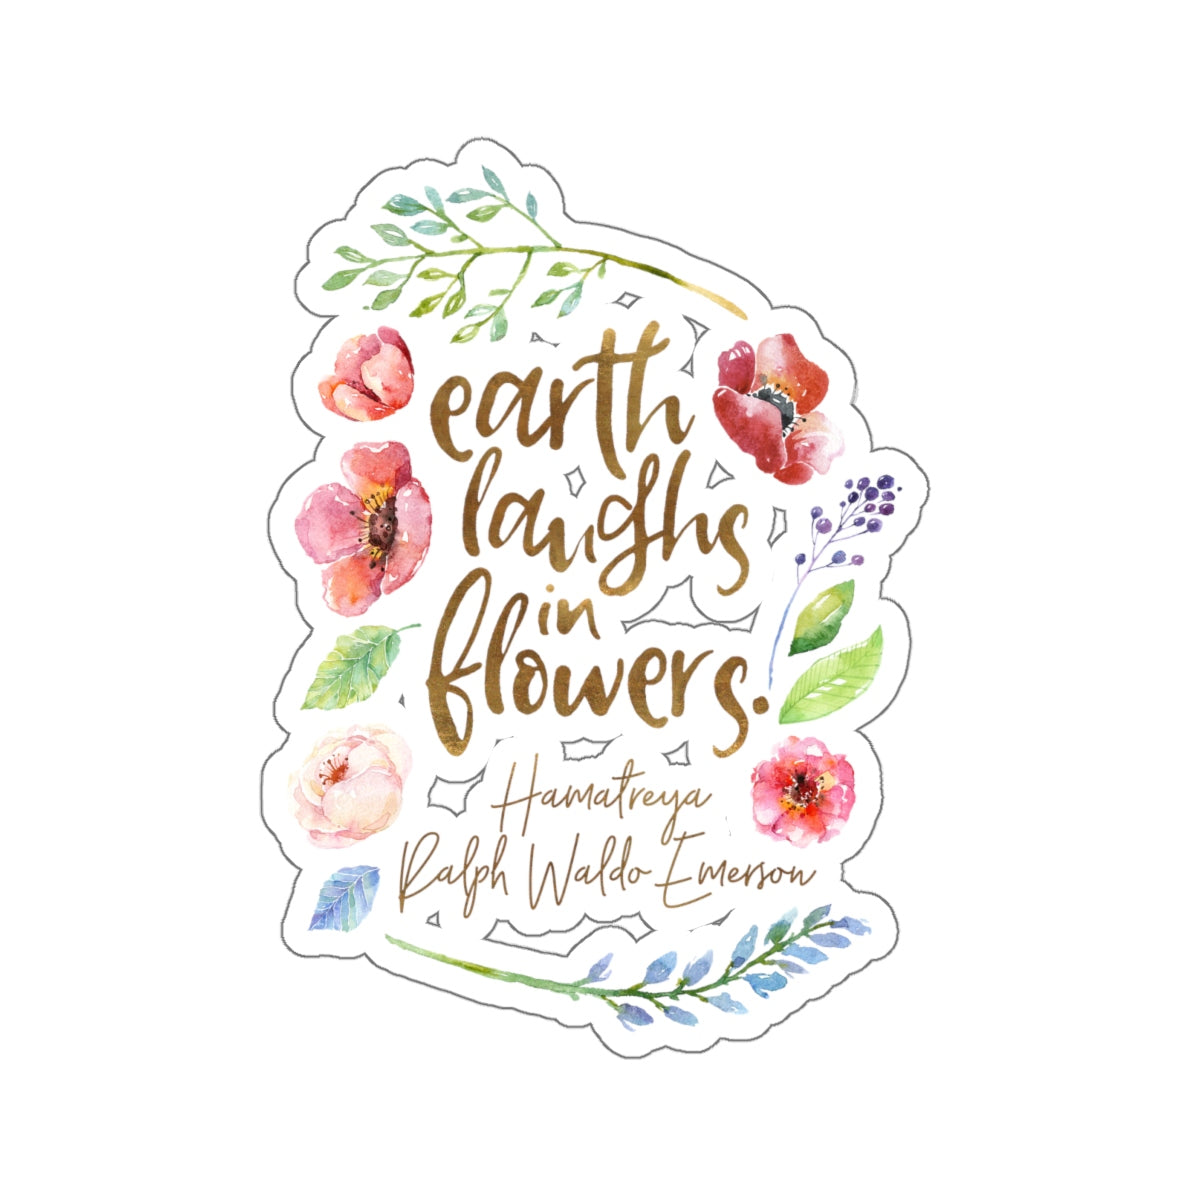 Earth laughs in flowers. Ralph Waldo Emerson Quote Sticker - LitLifeCo.